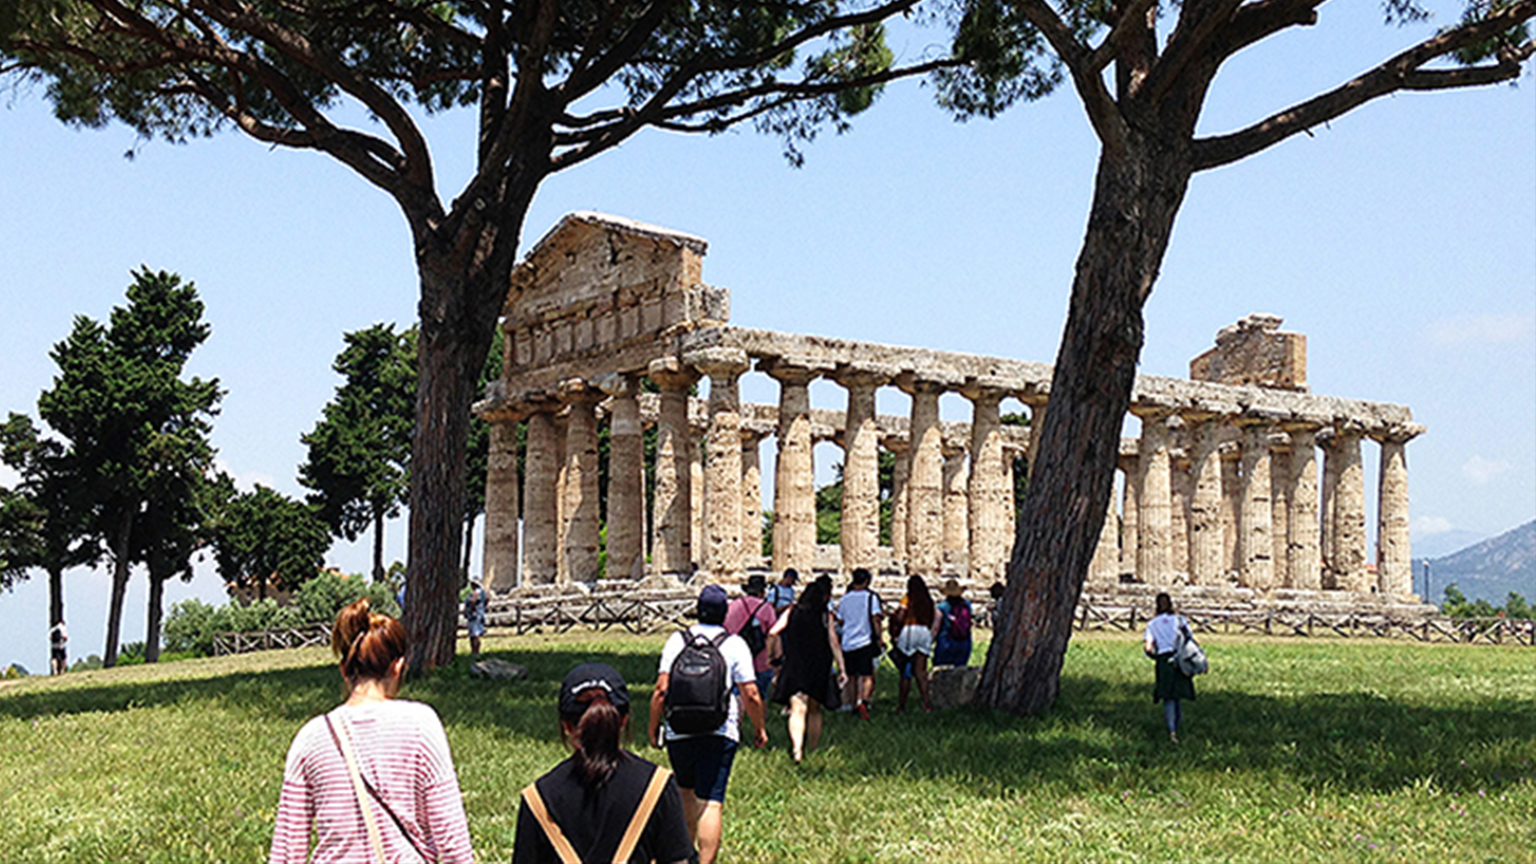 Students visit the Parthenon on the 2019 Art and Architecture in Greece and Italy international education program.